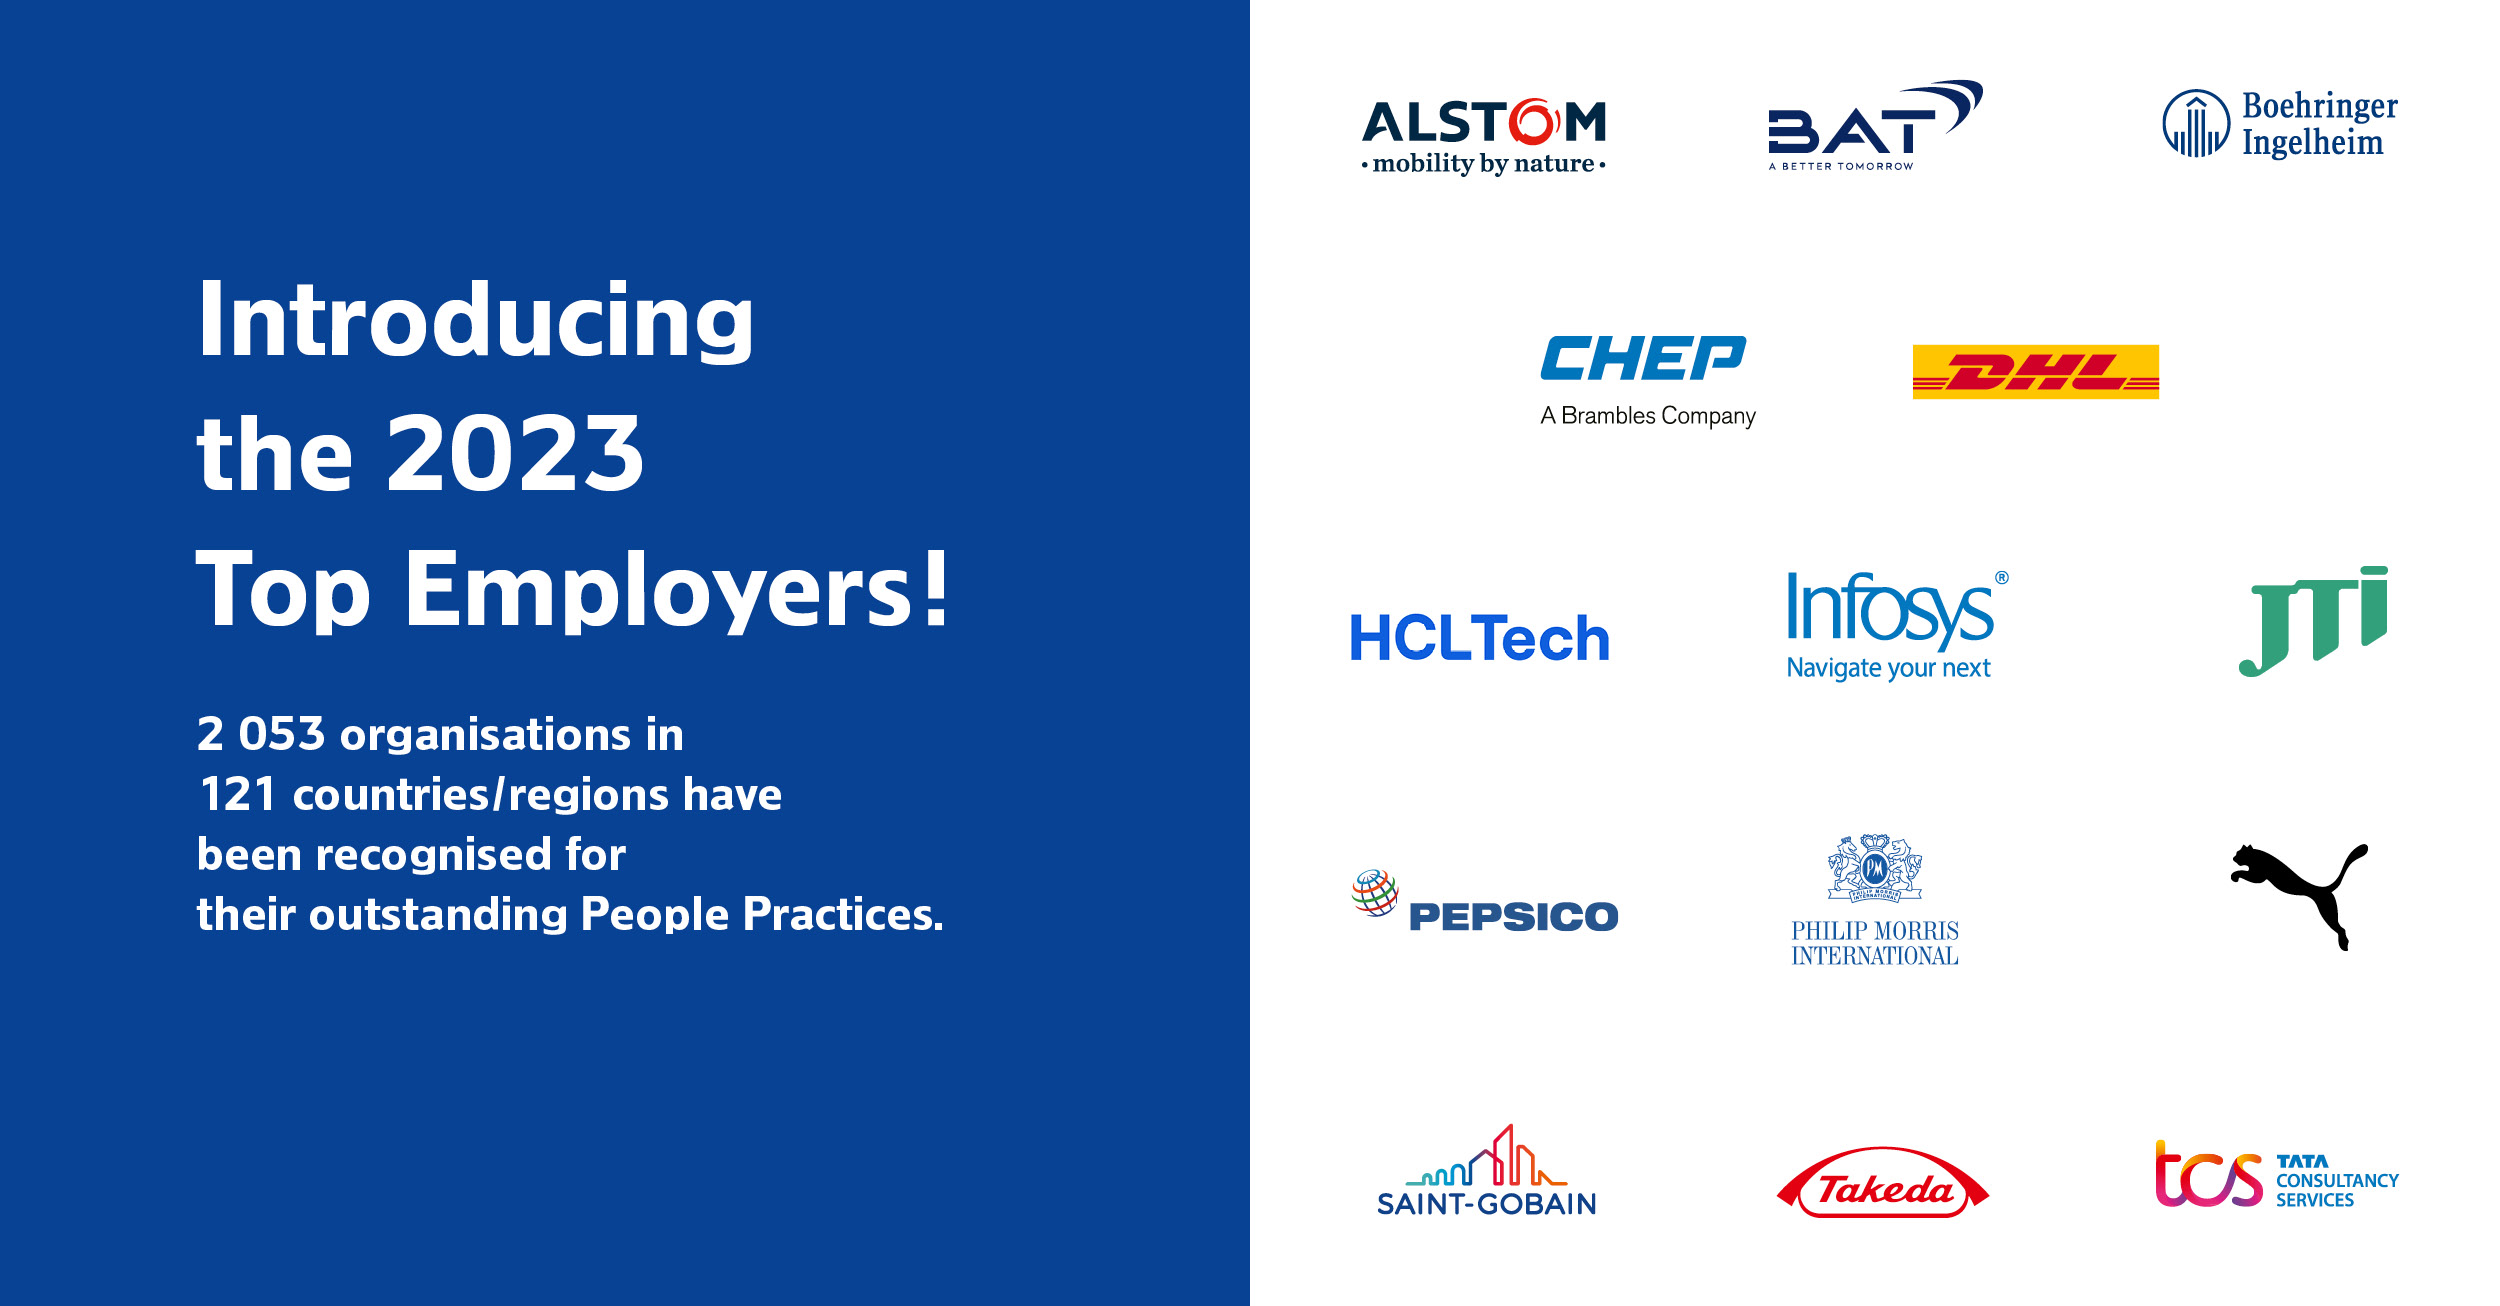 Introducing the 2023 Top Employers!